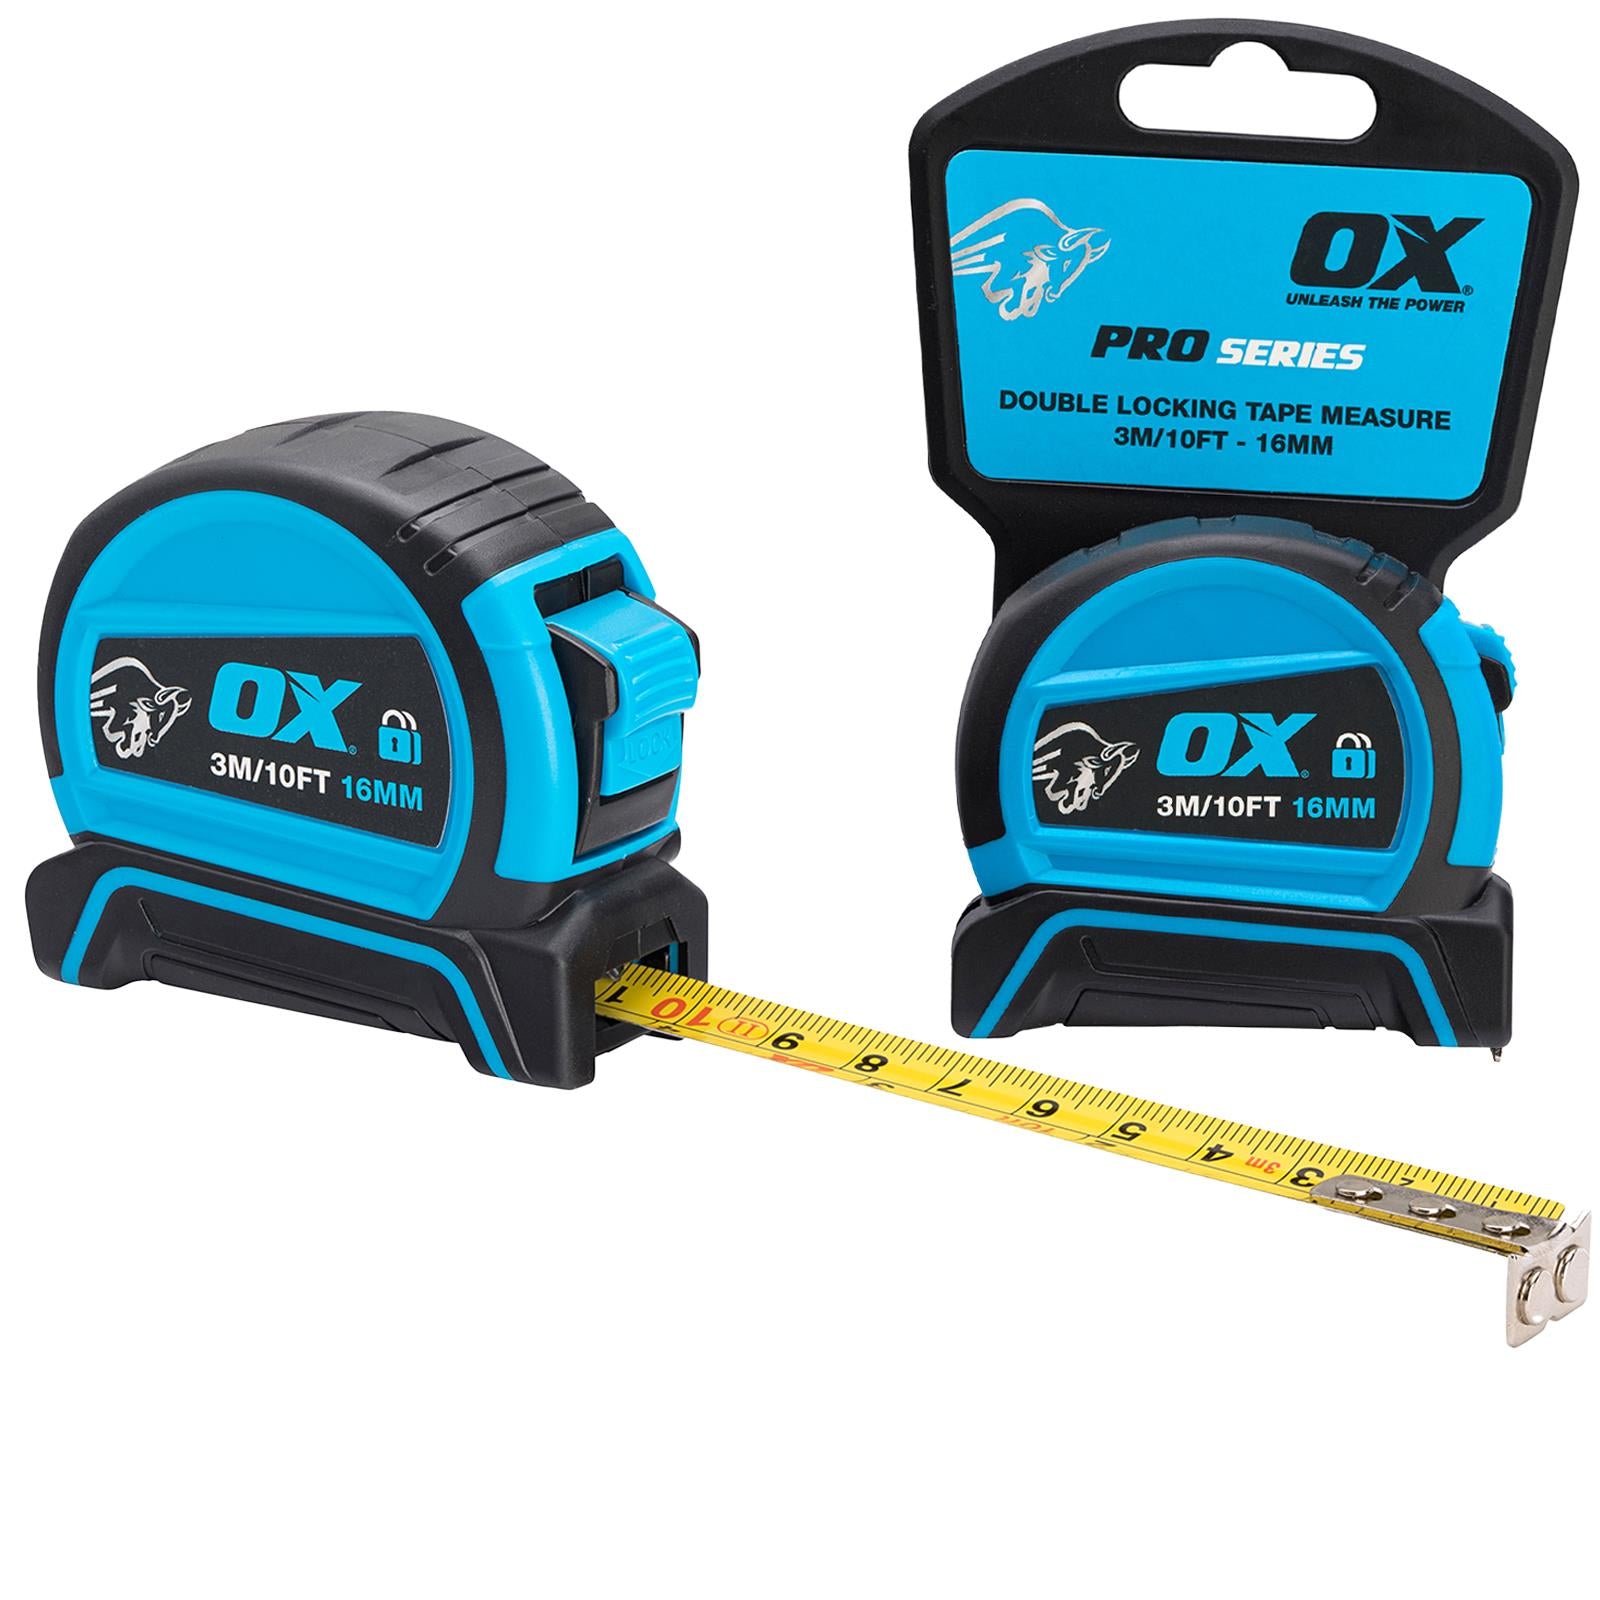 Milwaukee Tape Measure – To The Nines Manitowish Waters